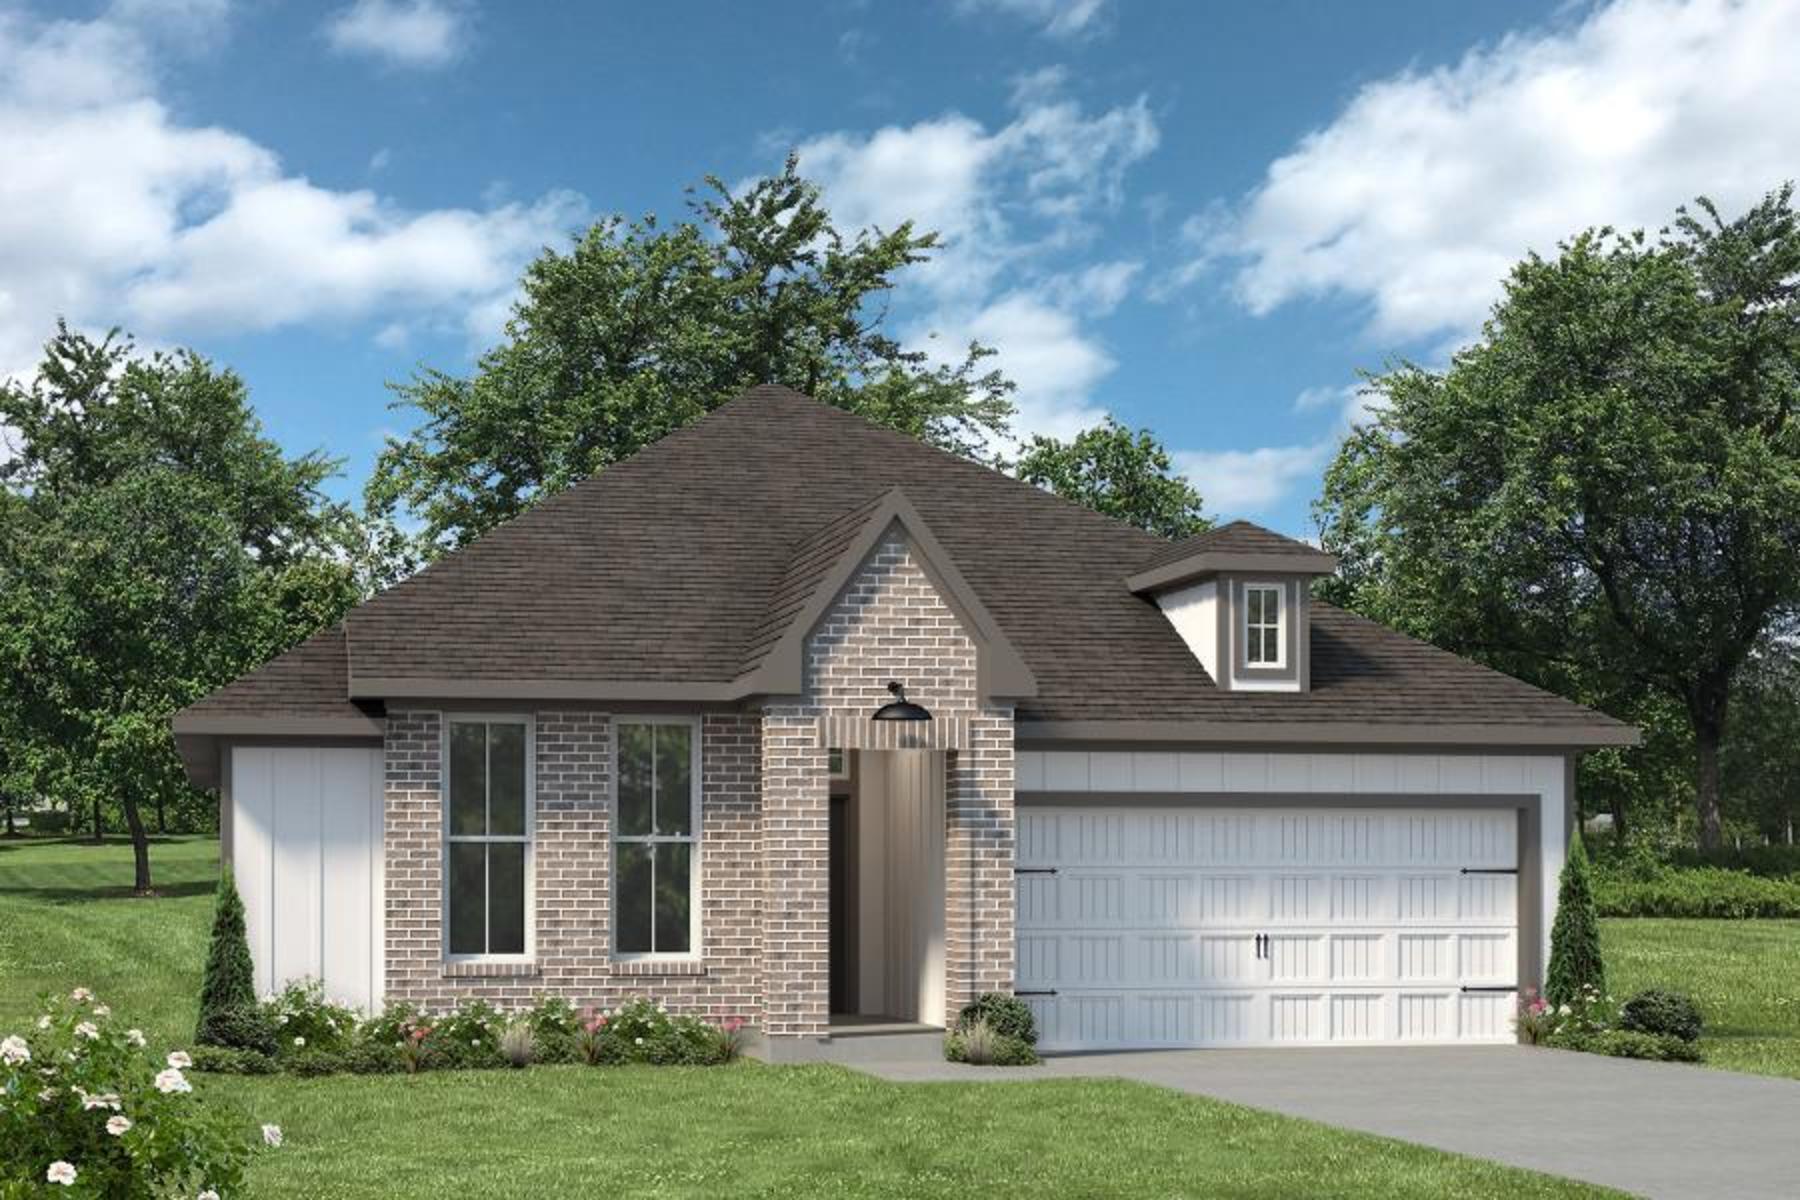 https://myhome.anewgo.com/client/stylecraft/community/Build%20On%20Your%20Lot/plan/1514%20%7C%20Bedford%20Modern?elevId=70. Bedford New Home Floor Plan